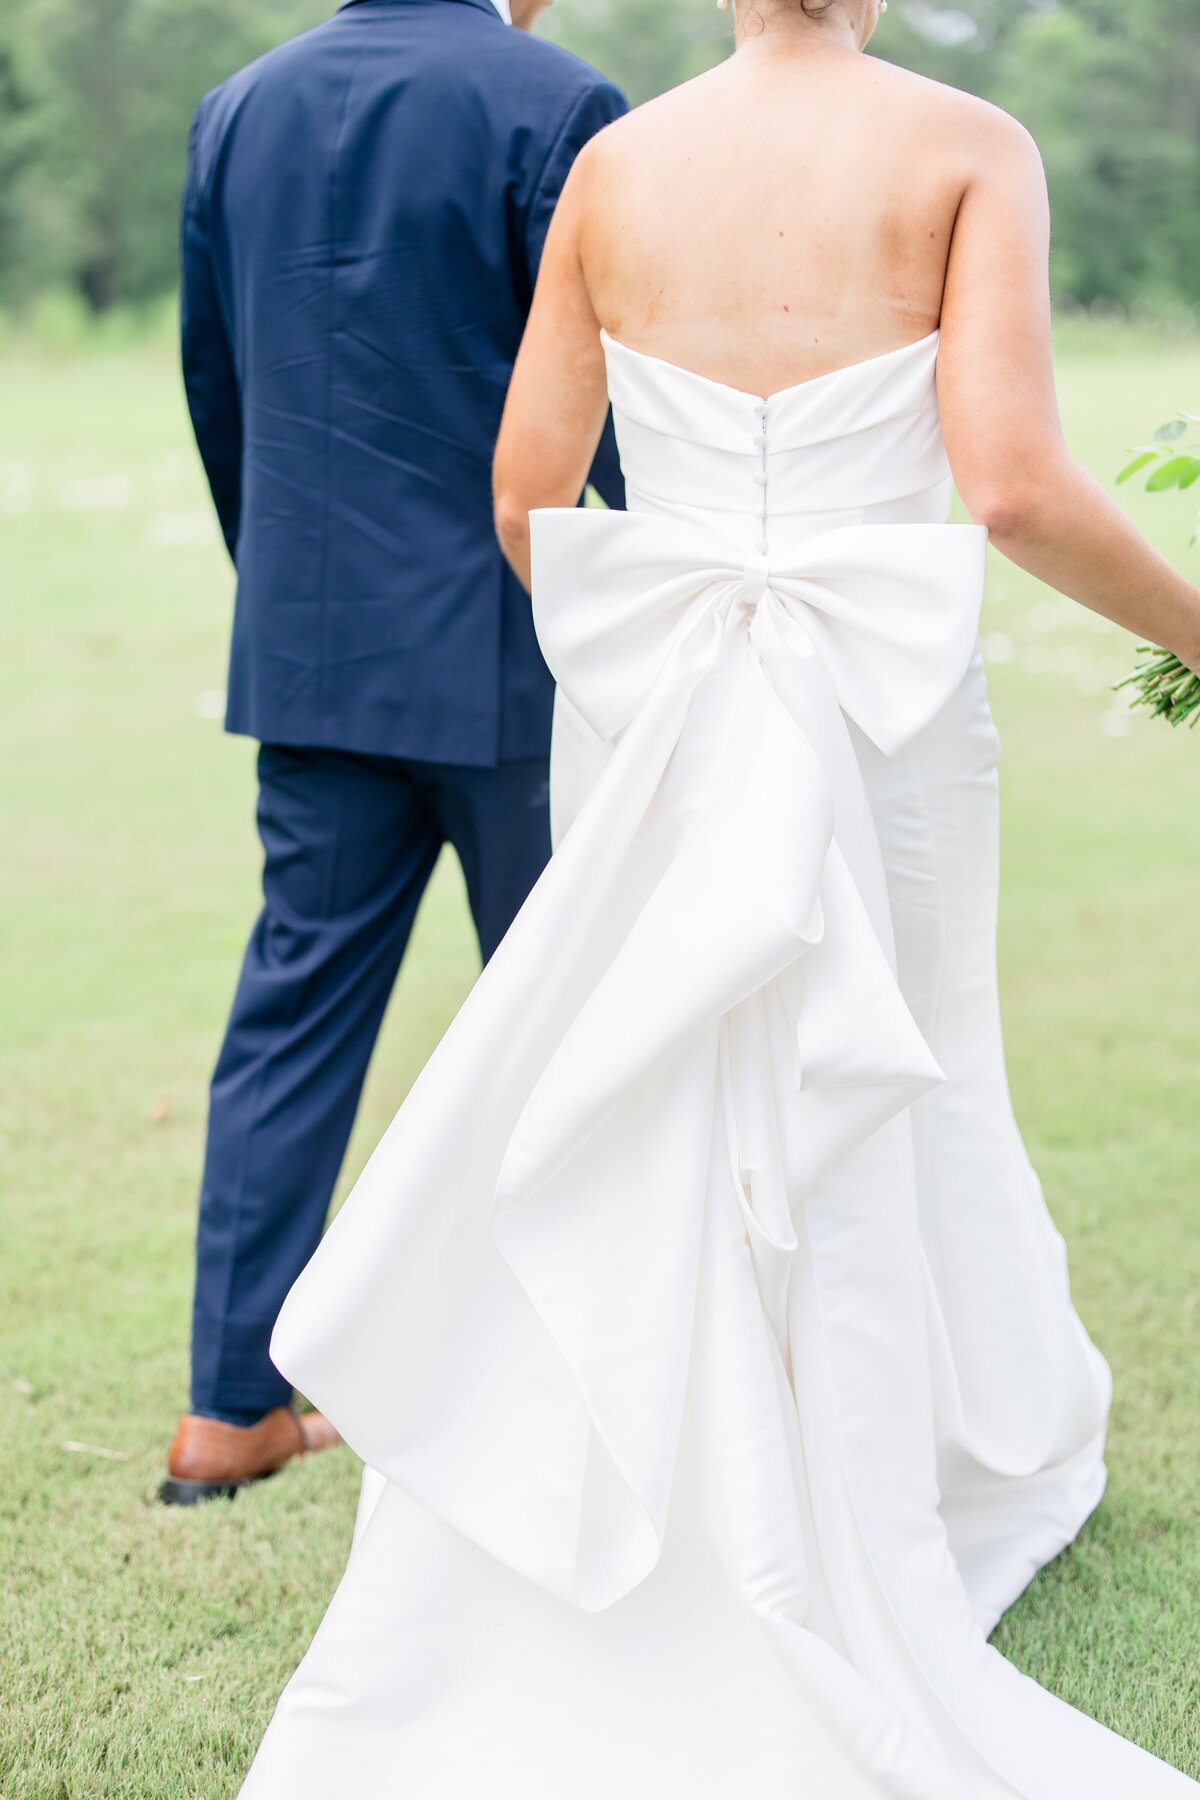 katie_and_alec_wedding_photography_wedding_videography_birmingham_alabama_husband_and_wife_team_photo_video_weddings_engagement_engagements_light_airy_focused_on_marriage__legacy_at_serenity_farms_wedding_41